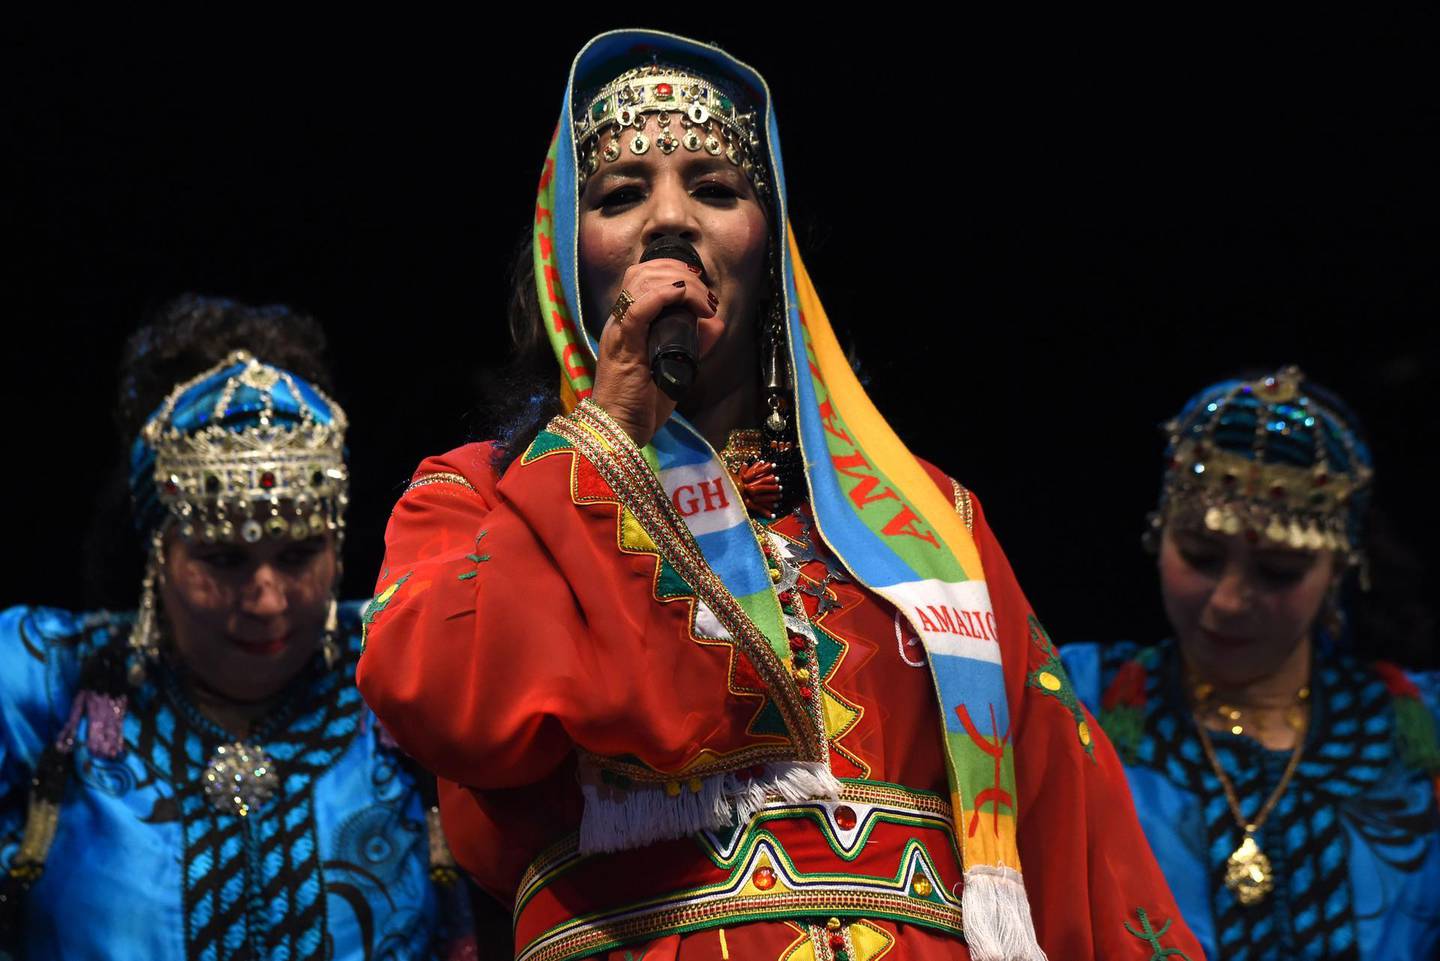 Amazigh singer Fatima Tabaamrant performs during the festival  "Edition Tiwsi " to celebrate the Amazigh new year, also called "Yennayer", the 2,965th year,  on January 12, 2015 in Tiznit, Morocco. The Amazighs, or Berbers, are the ethnicity indigenous to North Africa west of the Nile Valley.   AFP PHOTO / FADEL SENNA (Photo by FADEL SENNA / AFP)